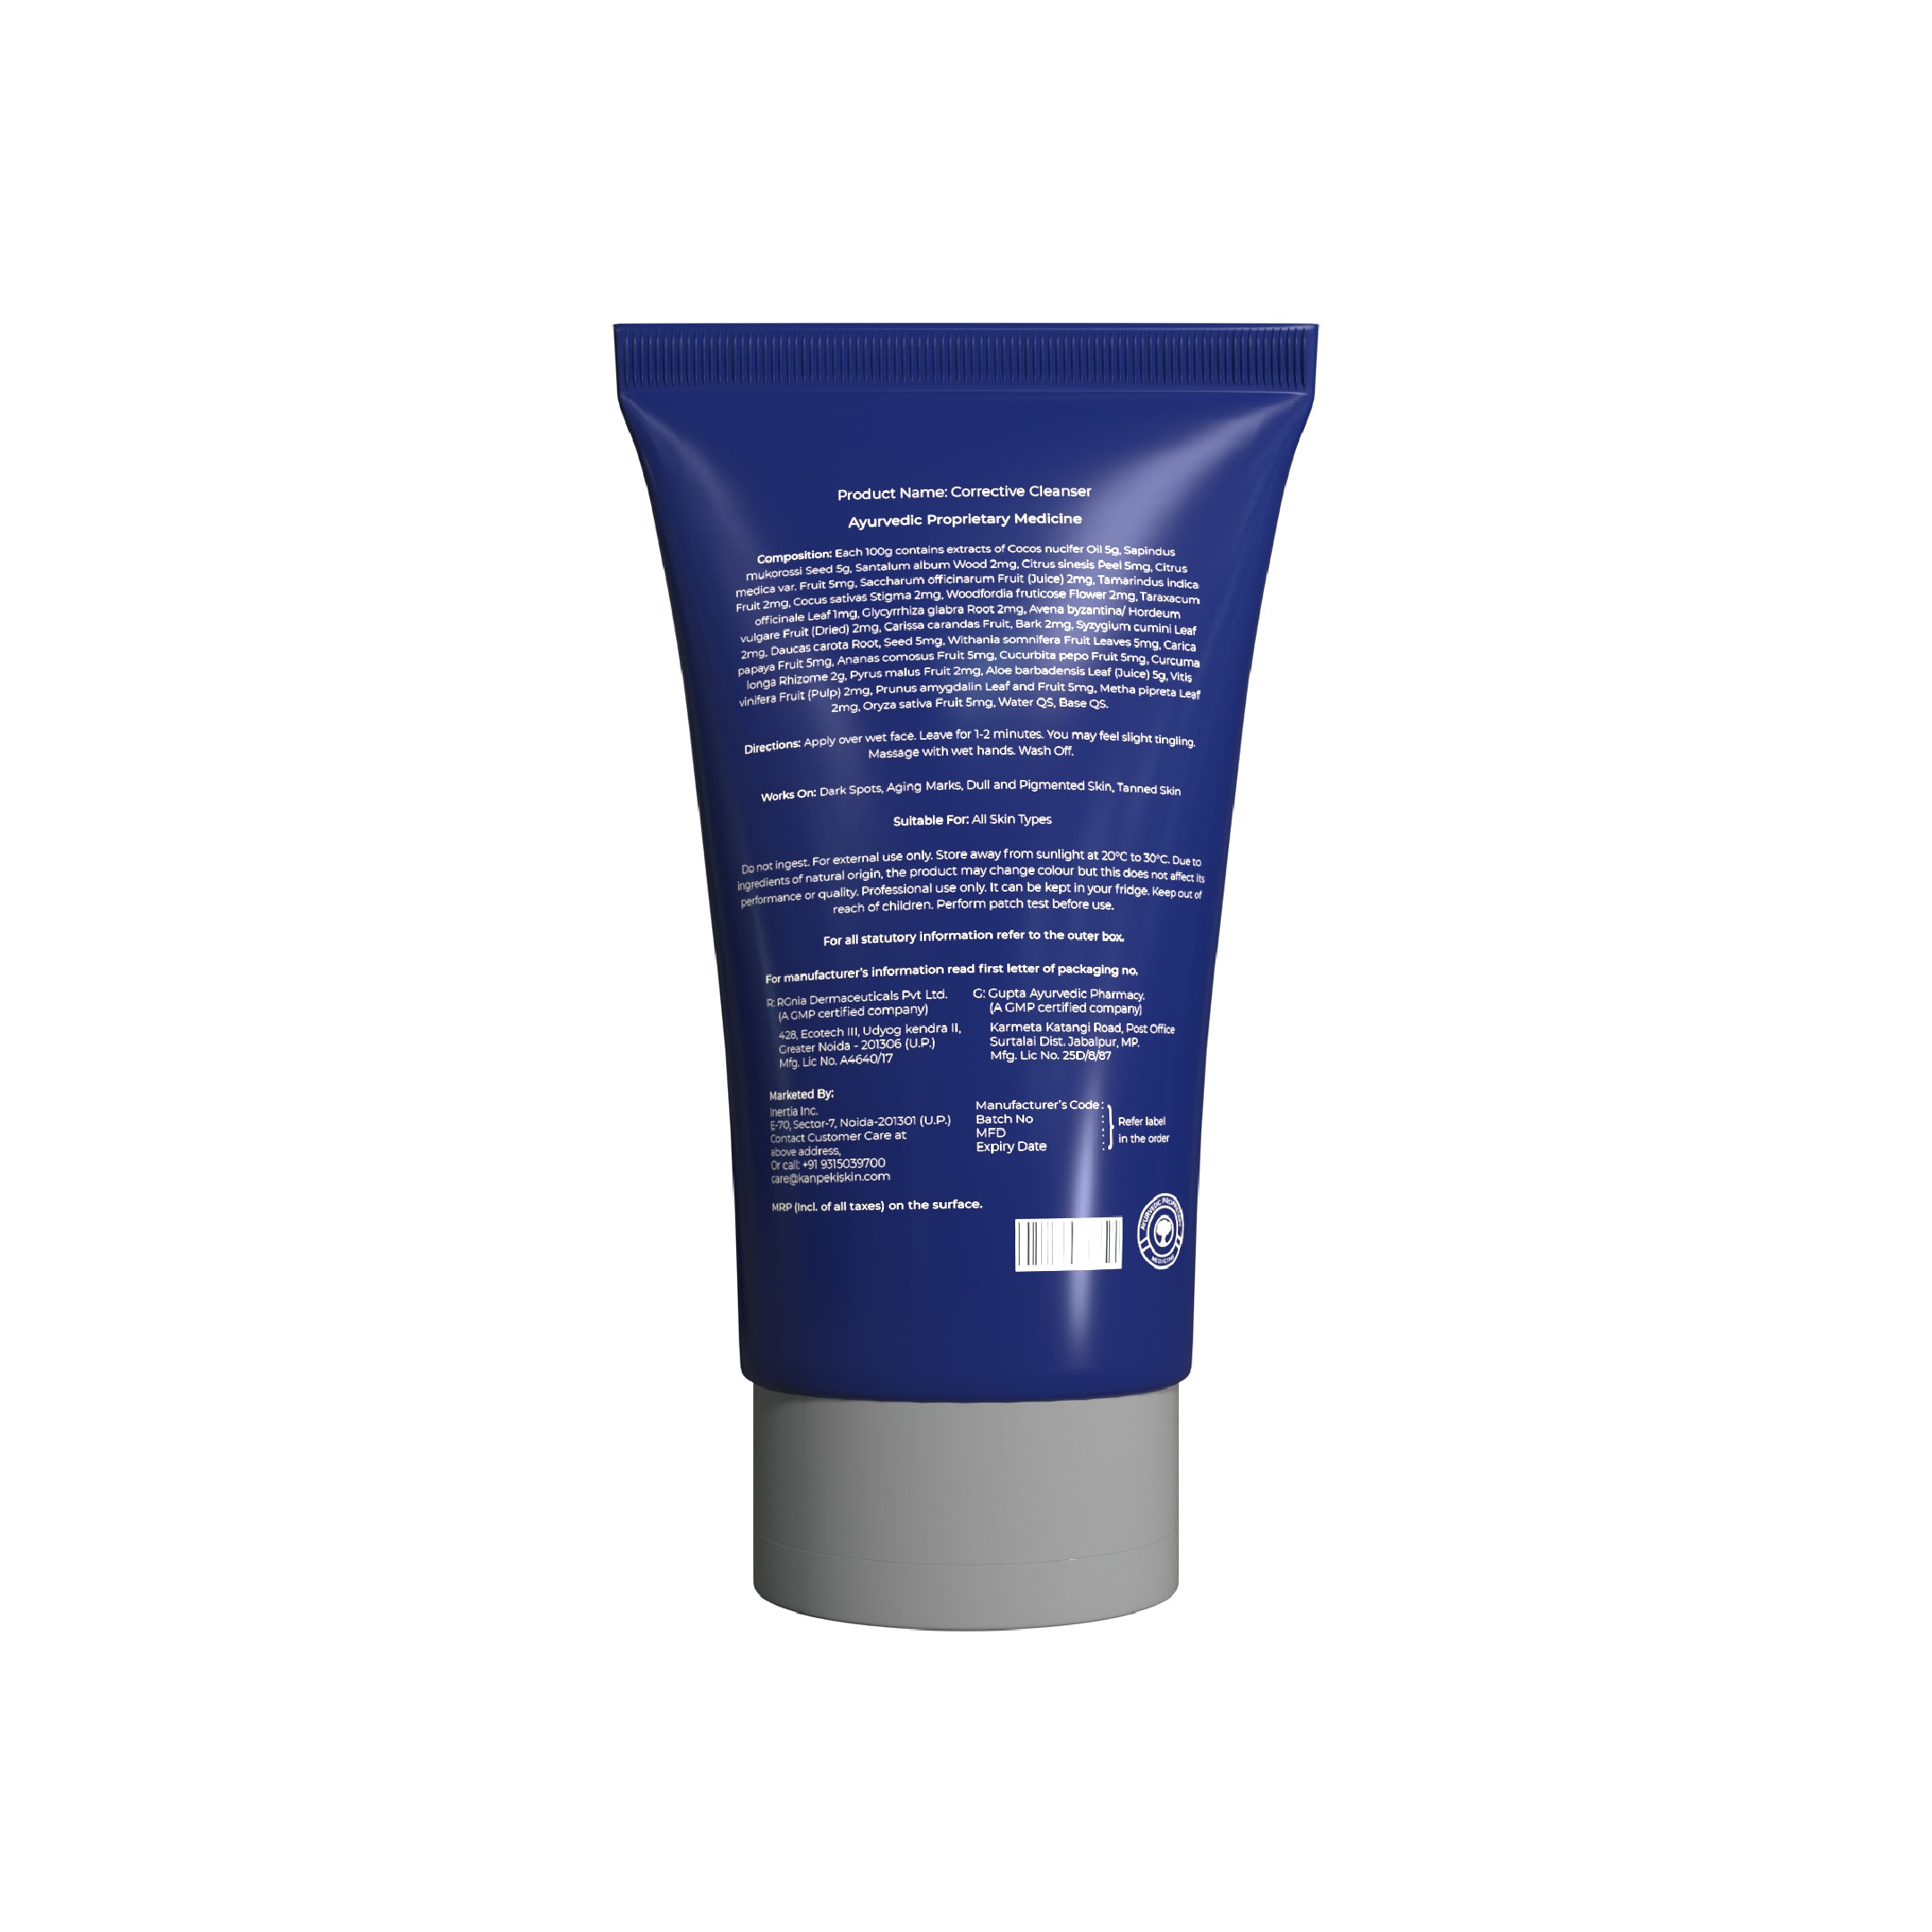 Corrective Cleanser